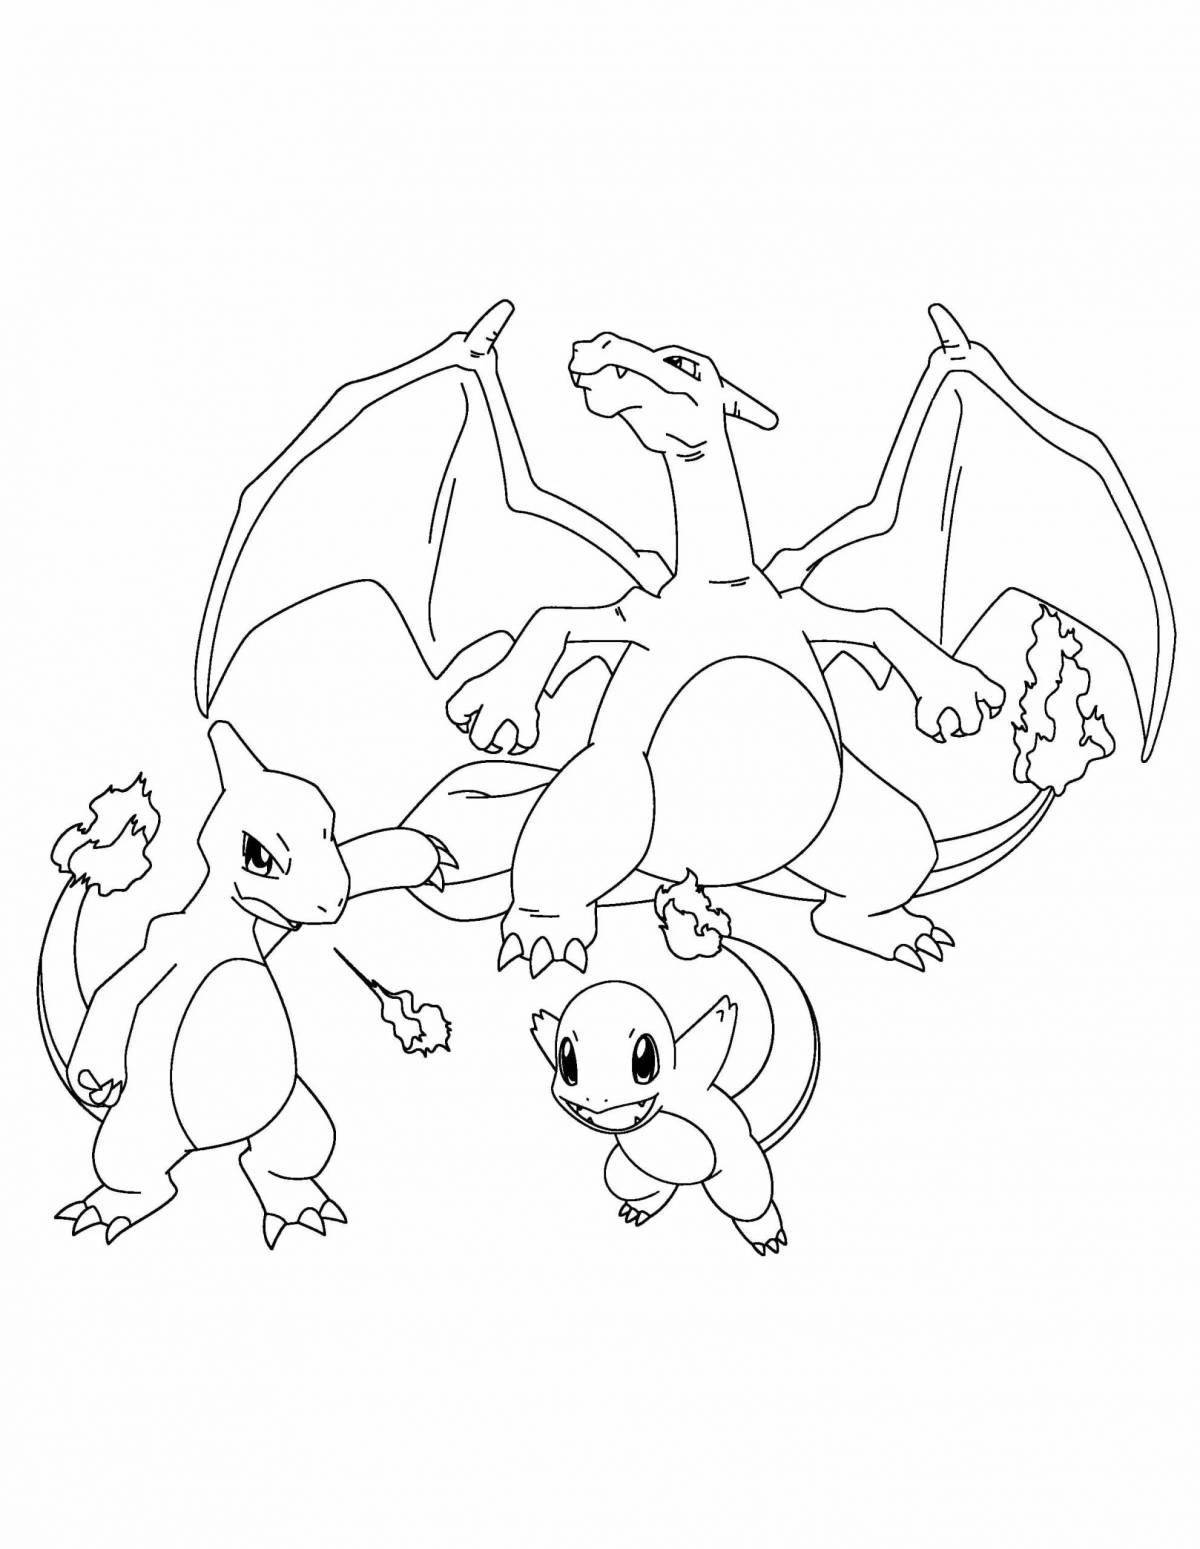 Outstanding charmander pokemon coloring page